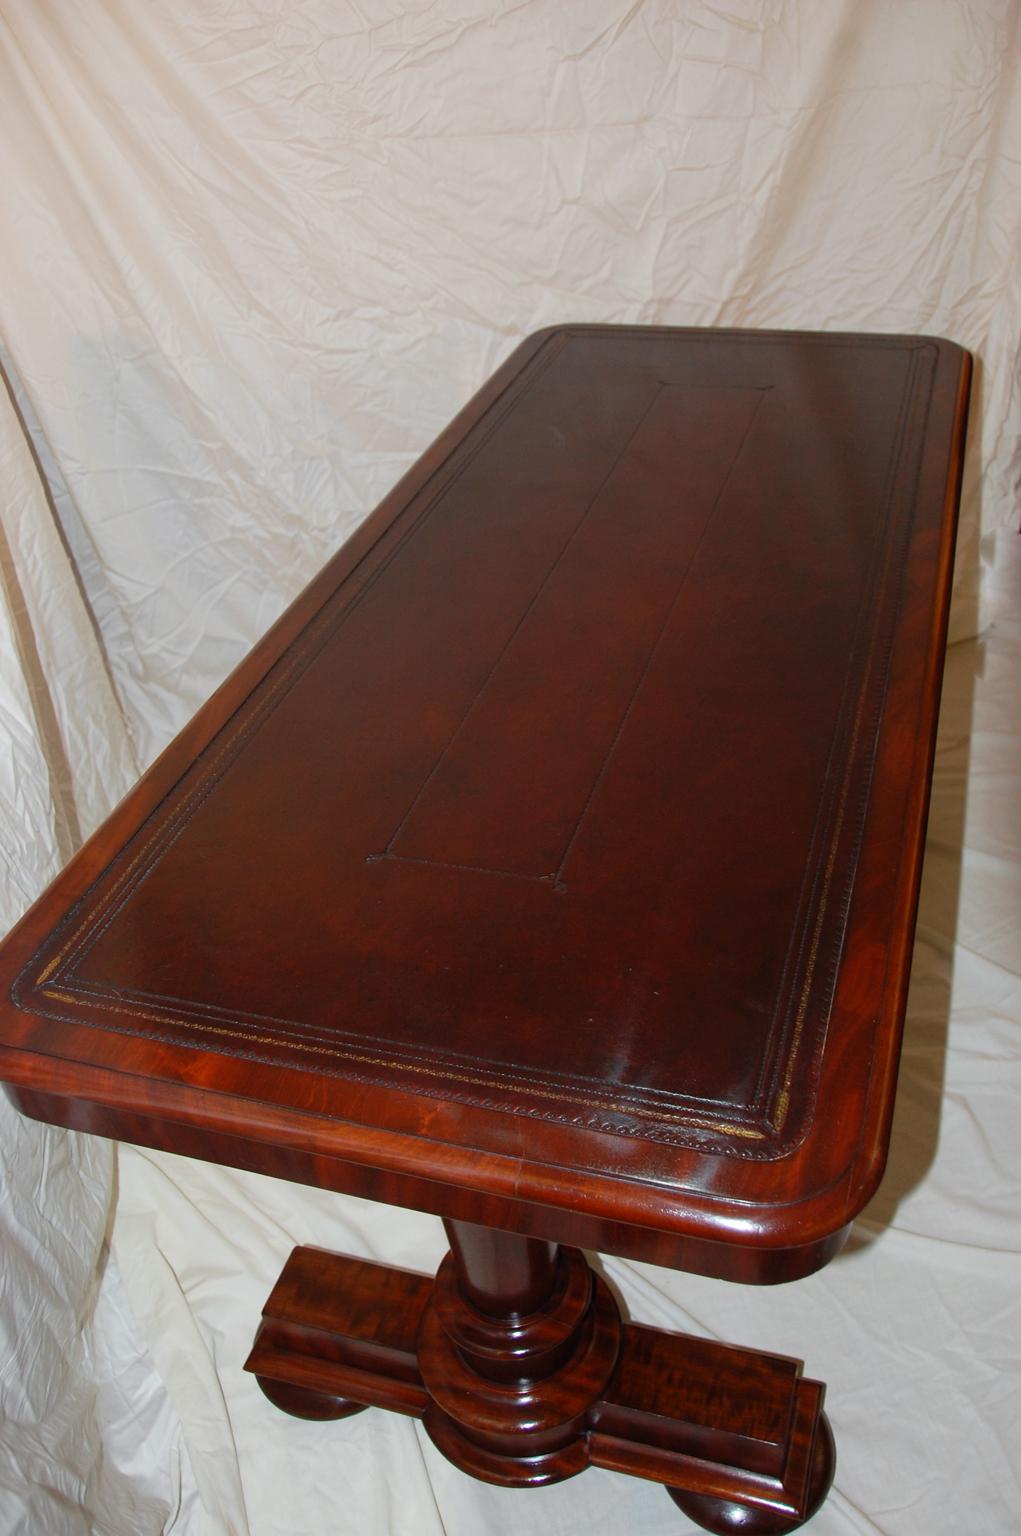 English Early Victorian mahogany leather top writing, library, or sofa table with bold pedestal ends. This simple yet handsome table has tapered, turned pedestal ends which are centered on a Classic mahogany platform supported by flattened bun feet.